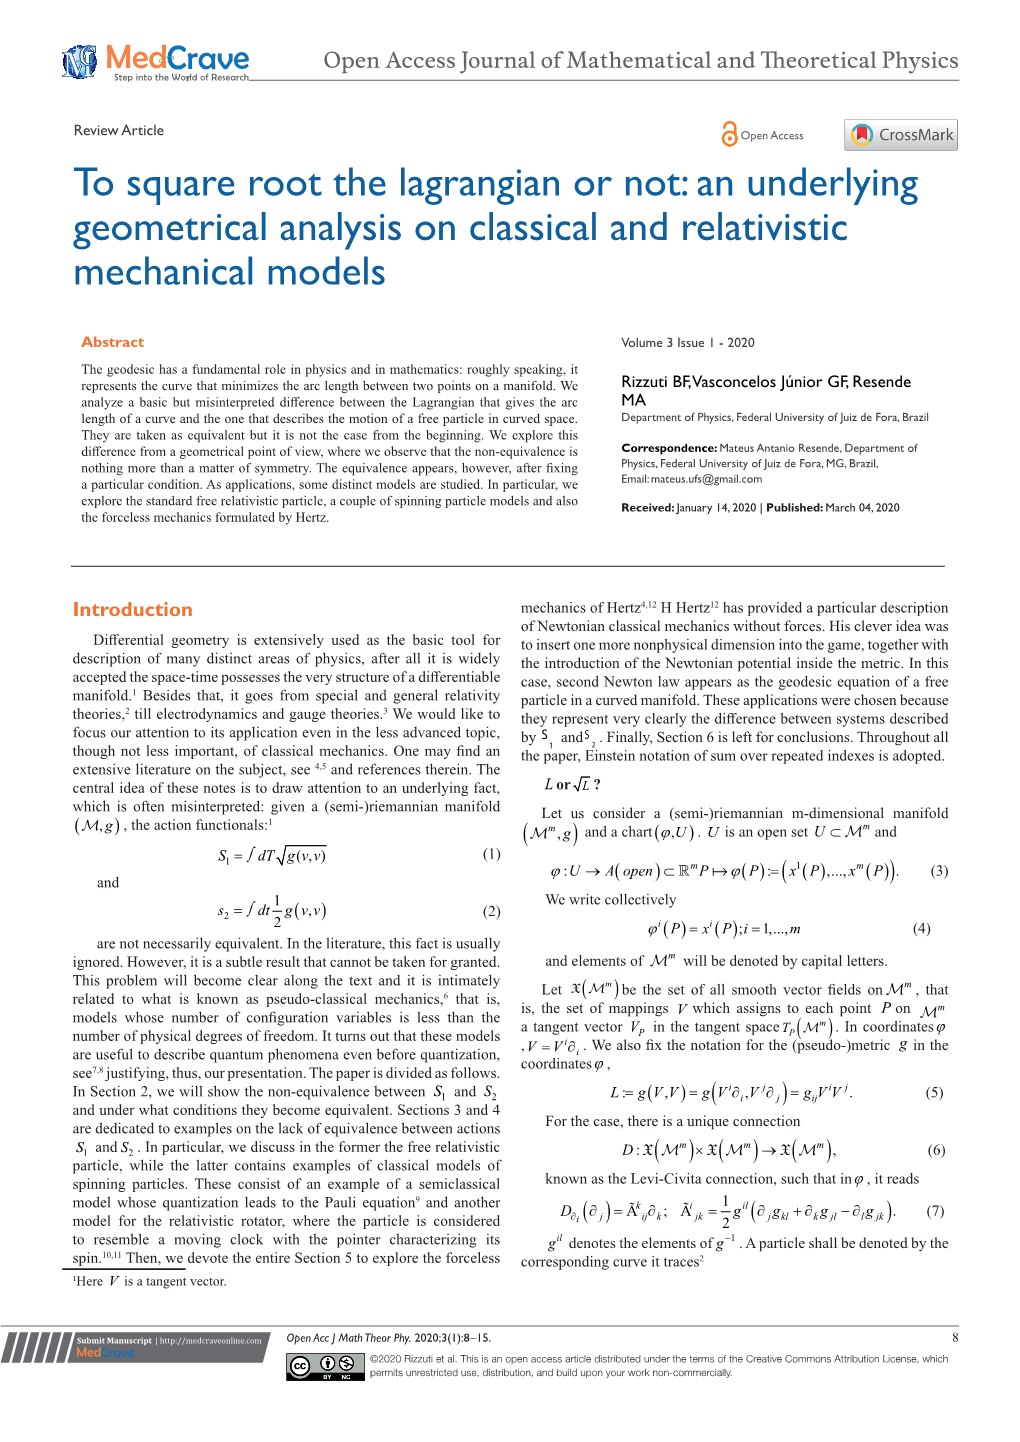 To Square Root the Lagrangian Or Not: an Underlying Geometrical Analysis on Classical and Relativistic Mechanical Models